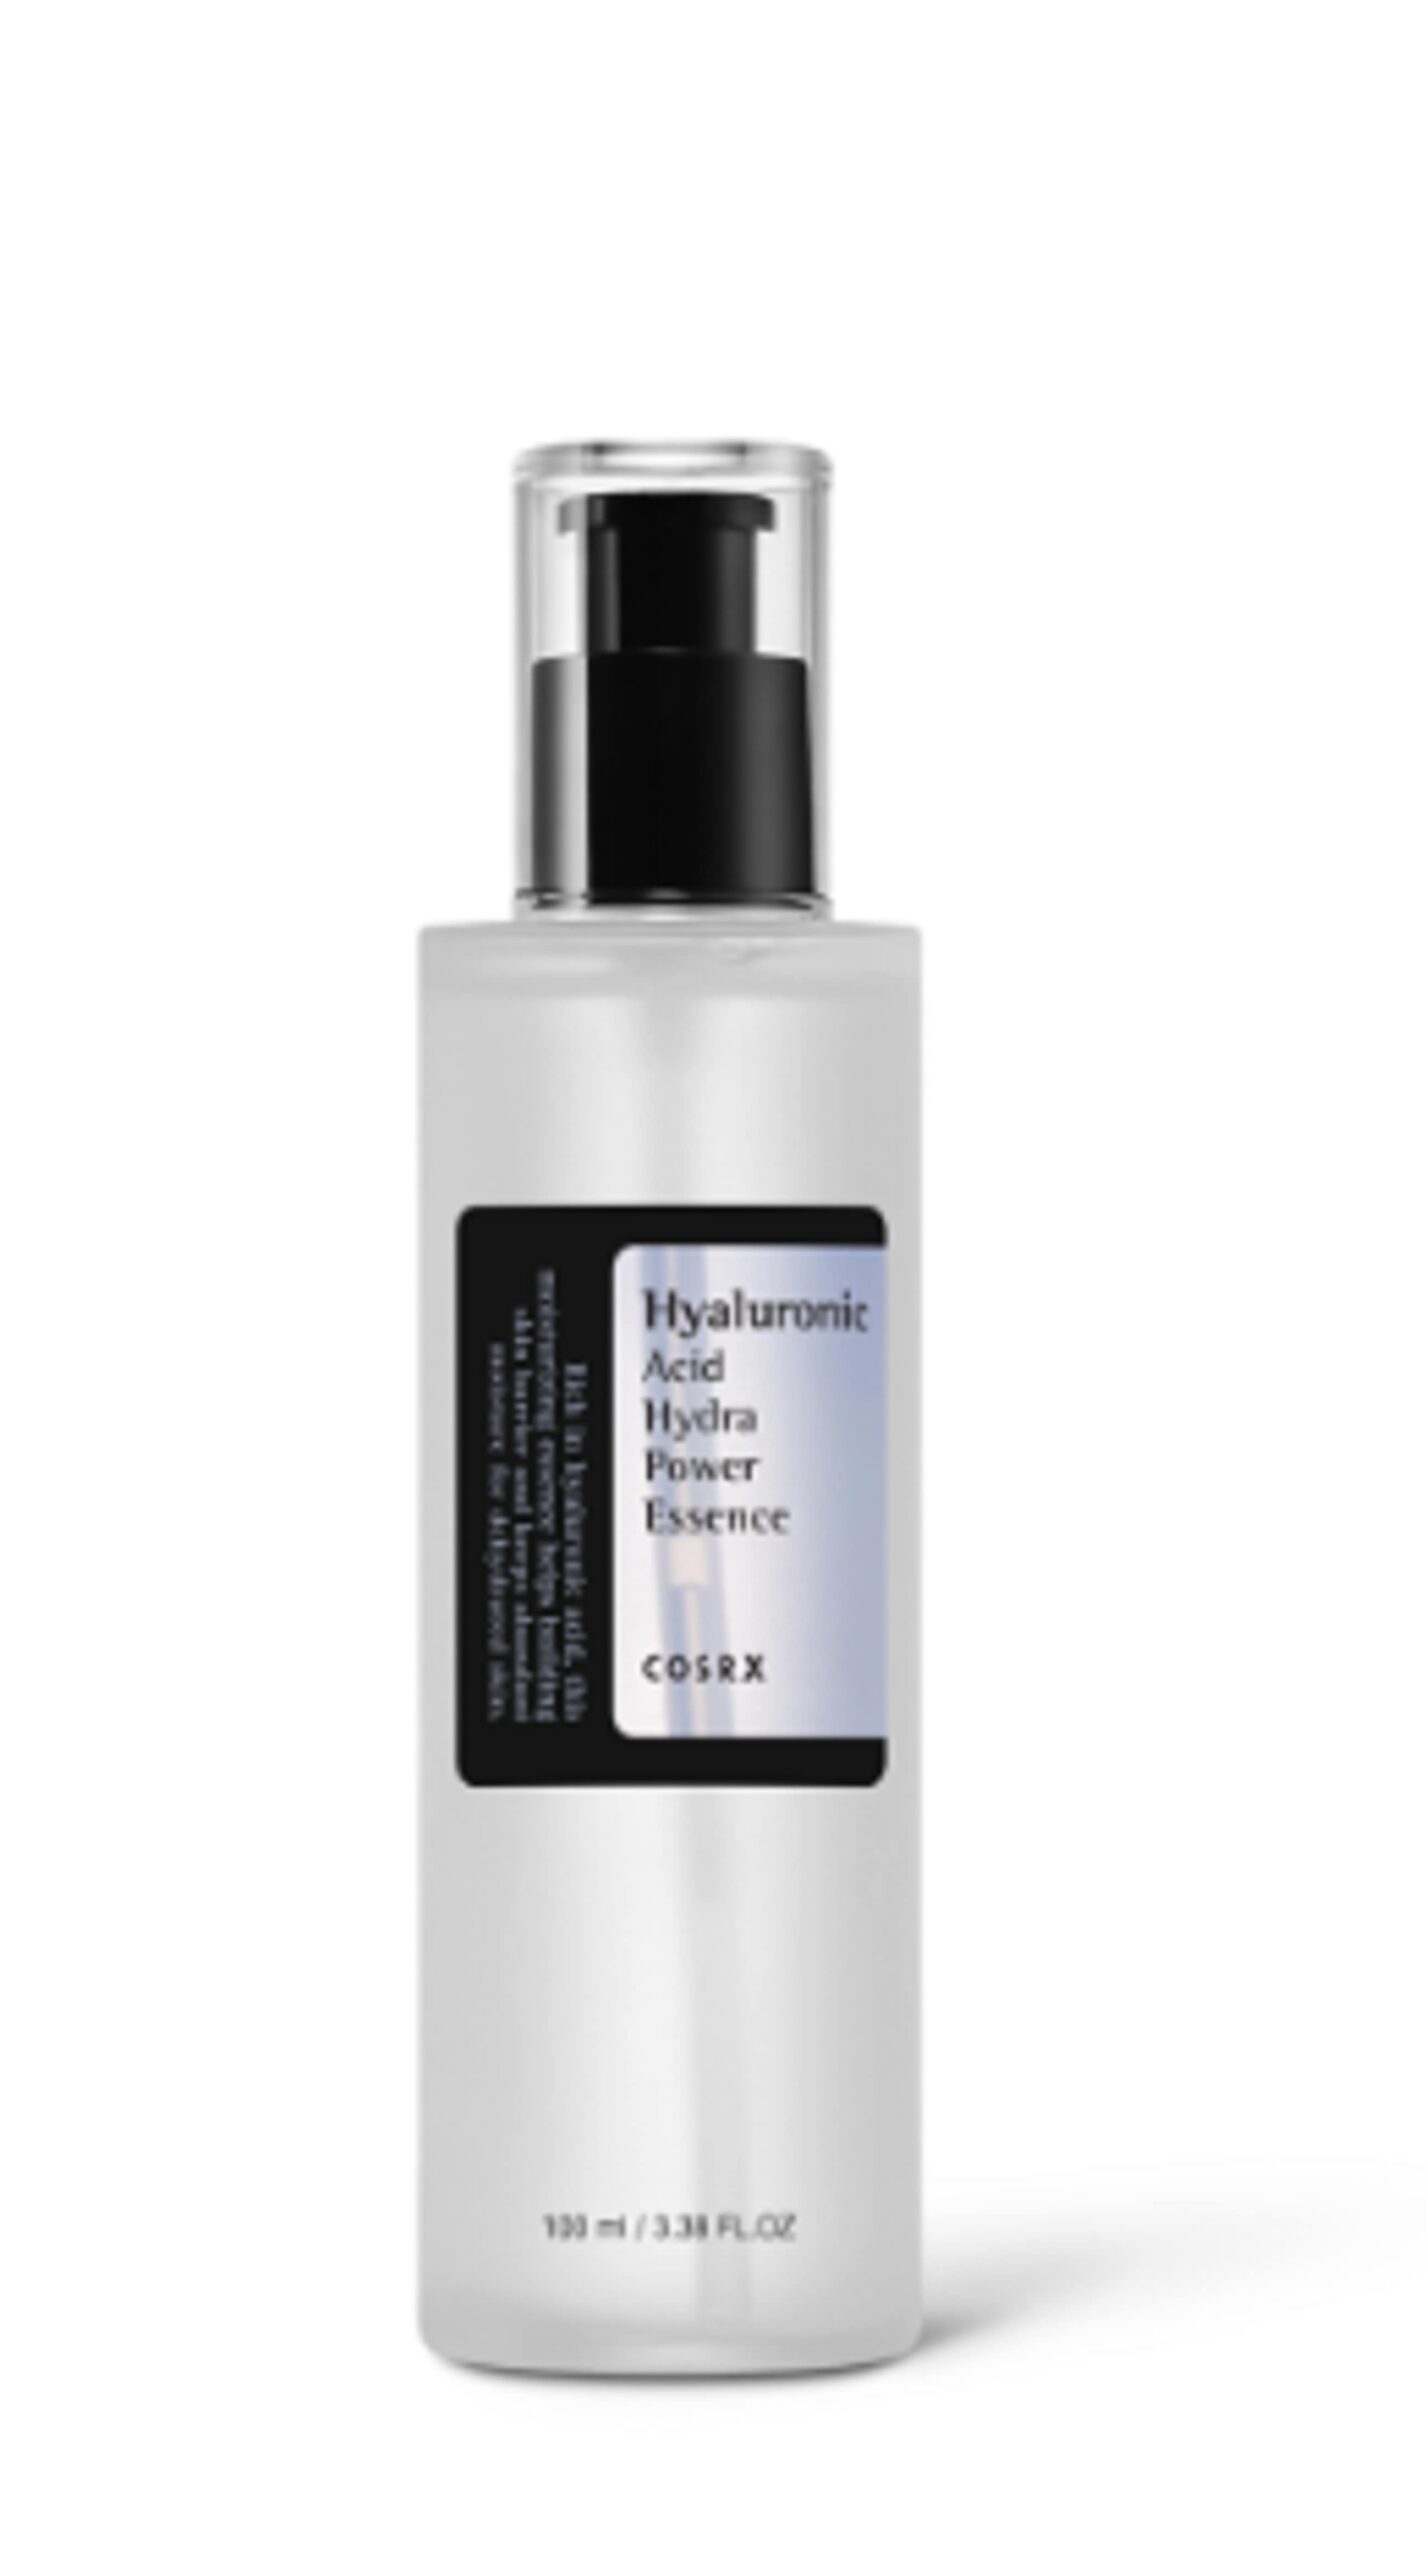 This essence harnesses the full potential of hyaluronic acid, delivering intense moisture to every layer of your skin